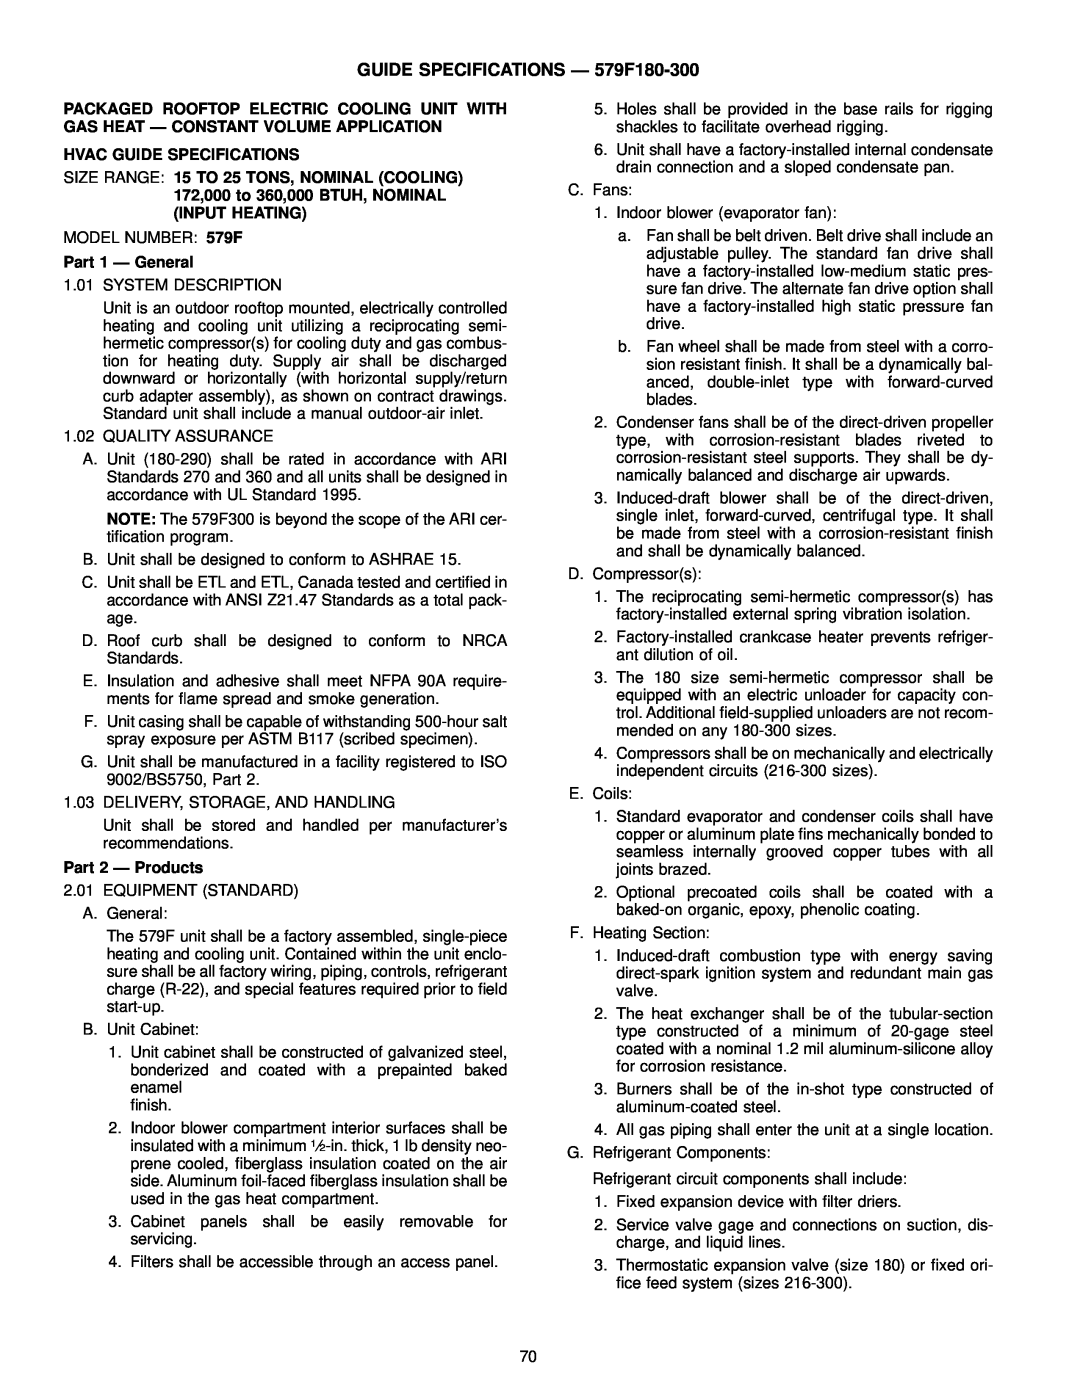 Bryant 580D manual GUIDE SPECIFICATIONS Ð 579F180-300, Hvac Guide Specifications, Part 1 Ð General, Part 2 Ð Products 